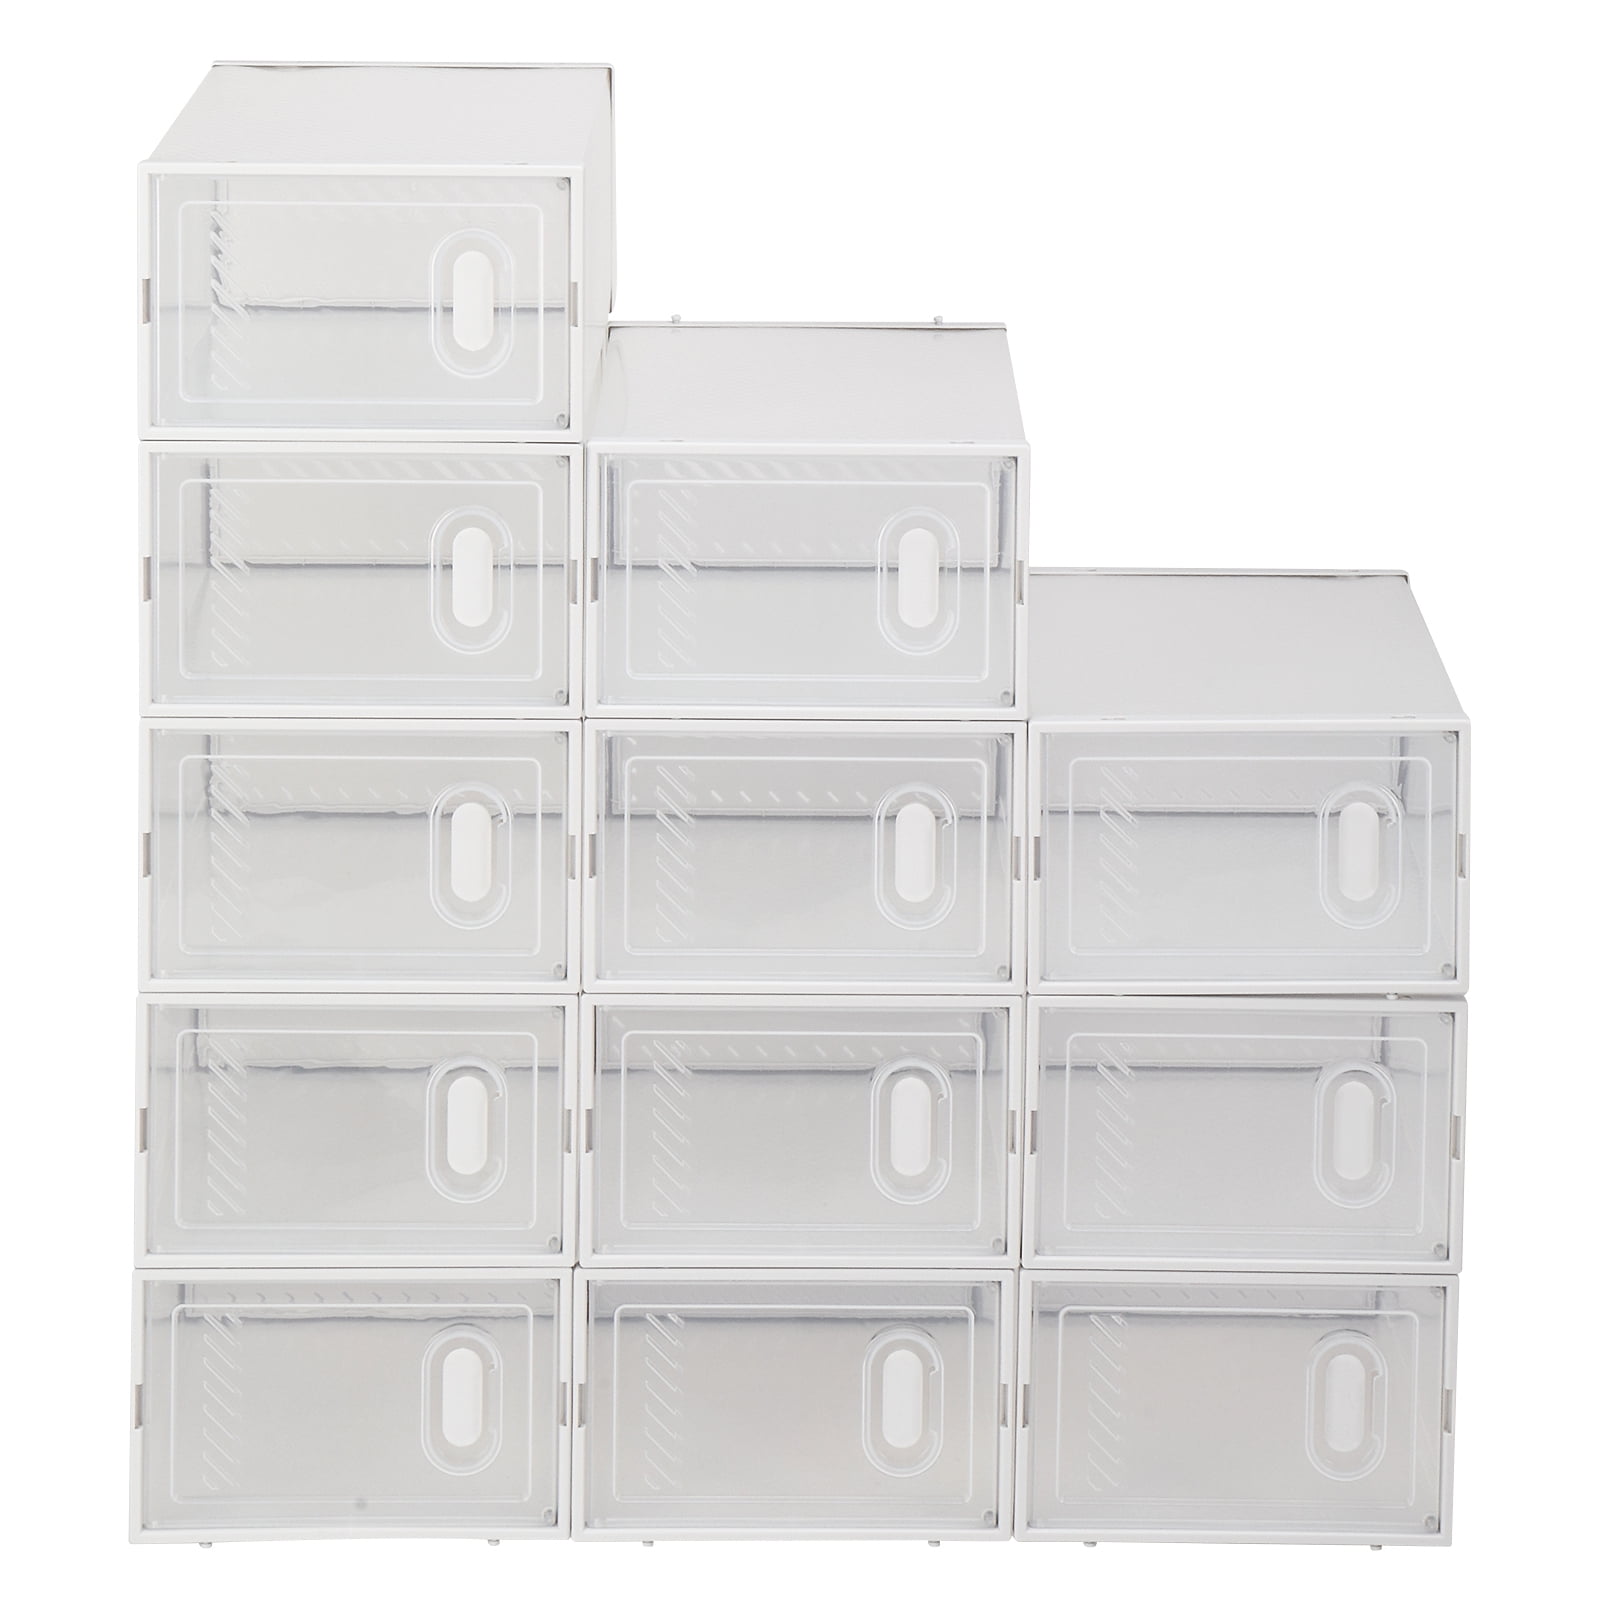 mDesign Household Plastic Storage Organizer Bin with Open Front - 8 Pack -  Clear